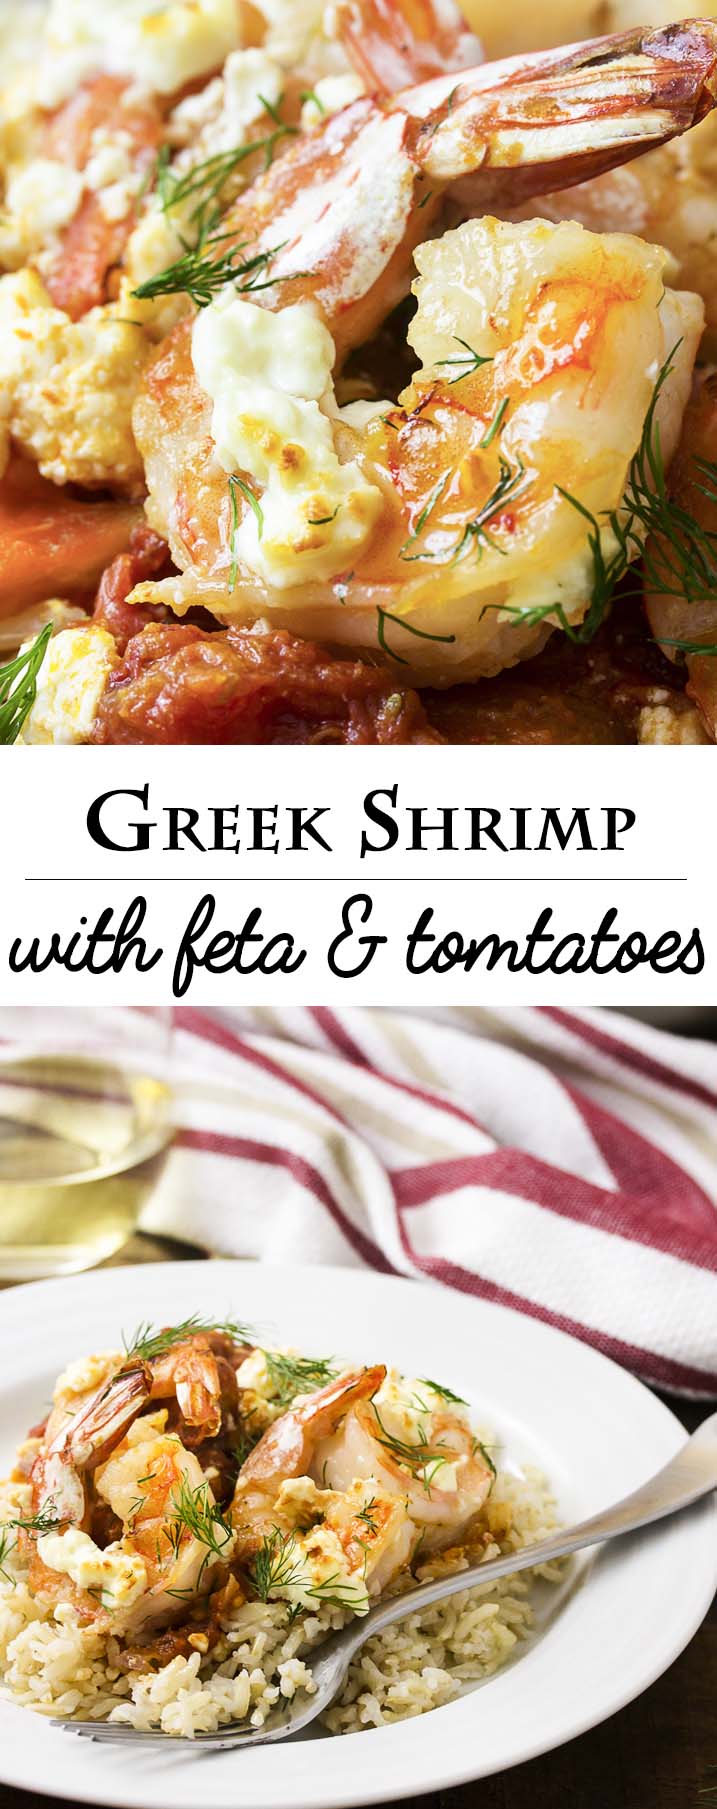 Juicy, plump shrimp are flambeed in brandy then topped with feta before being broiled over a bed of tomatoes in this classic Greek dish! | justalittlebitofbacon.com